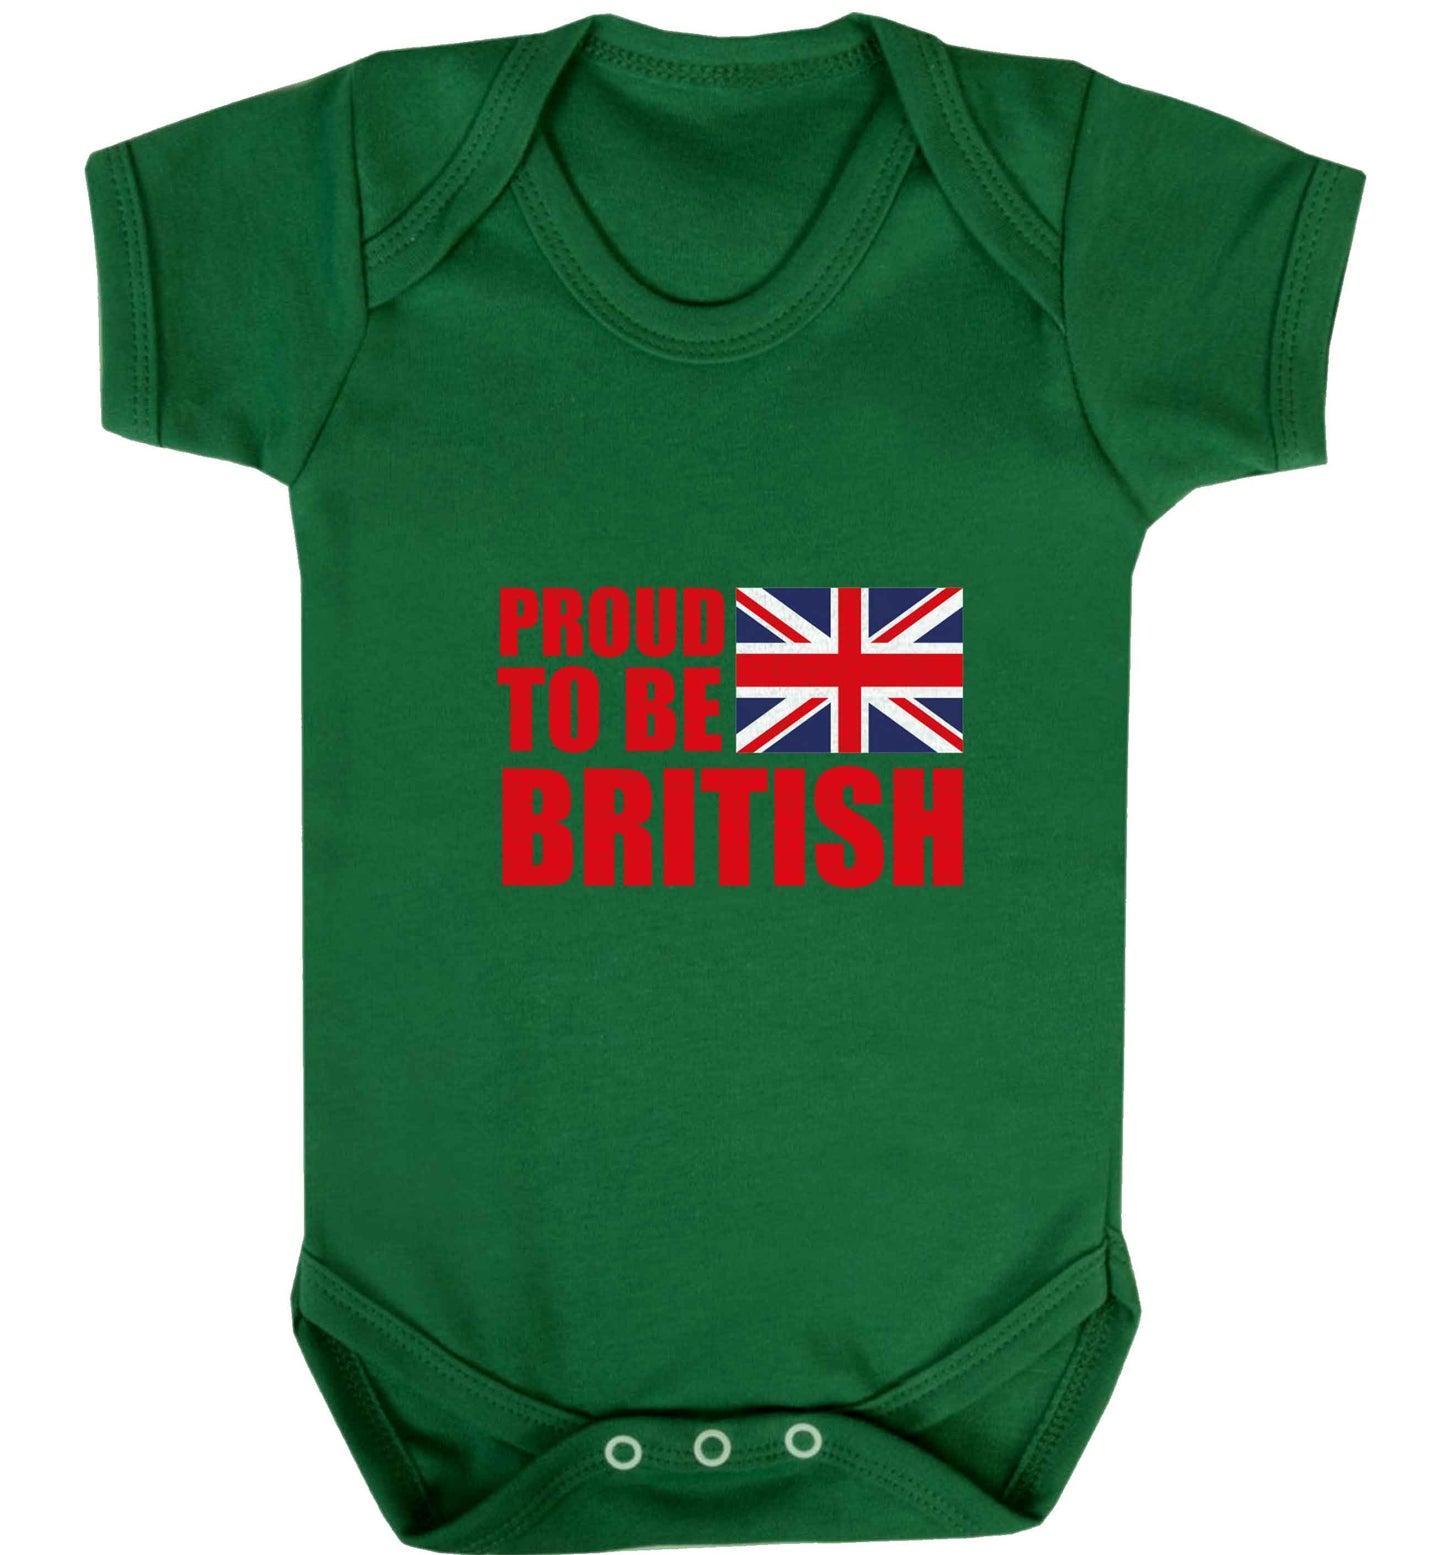 Proud to be British baby vest green 18-24 months